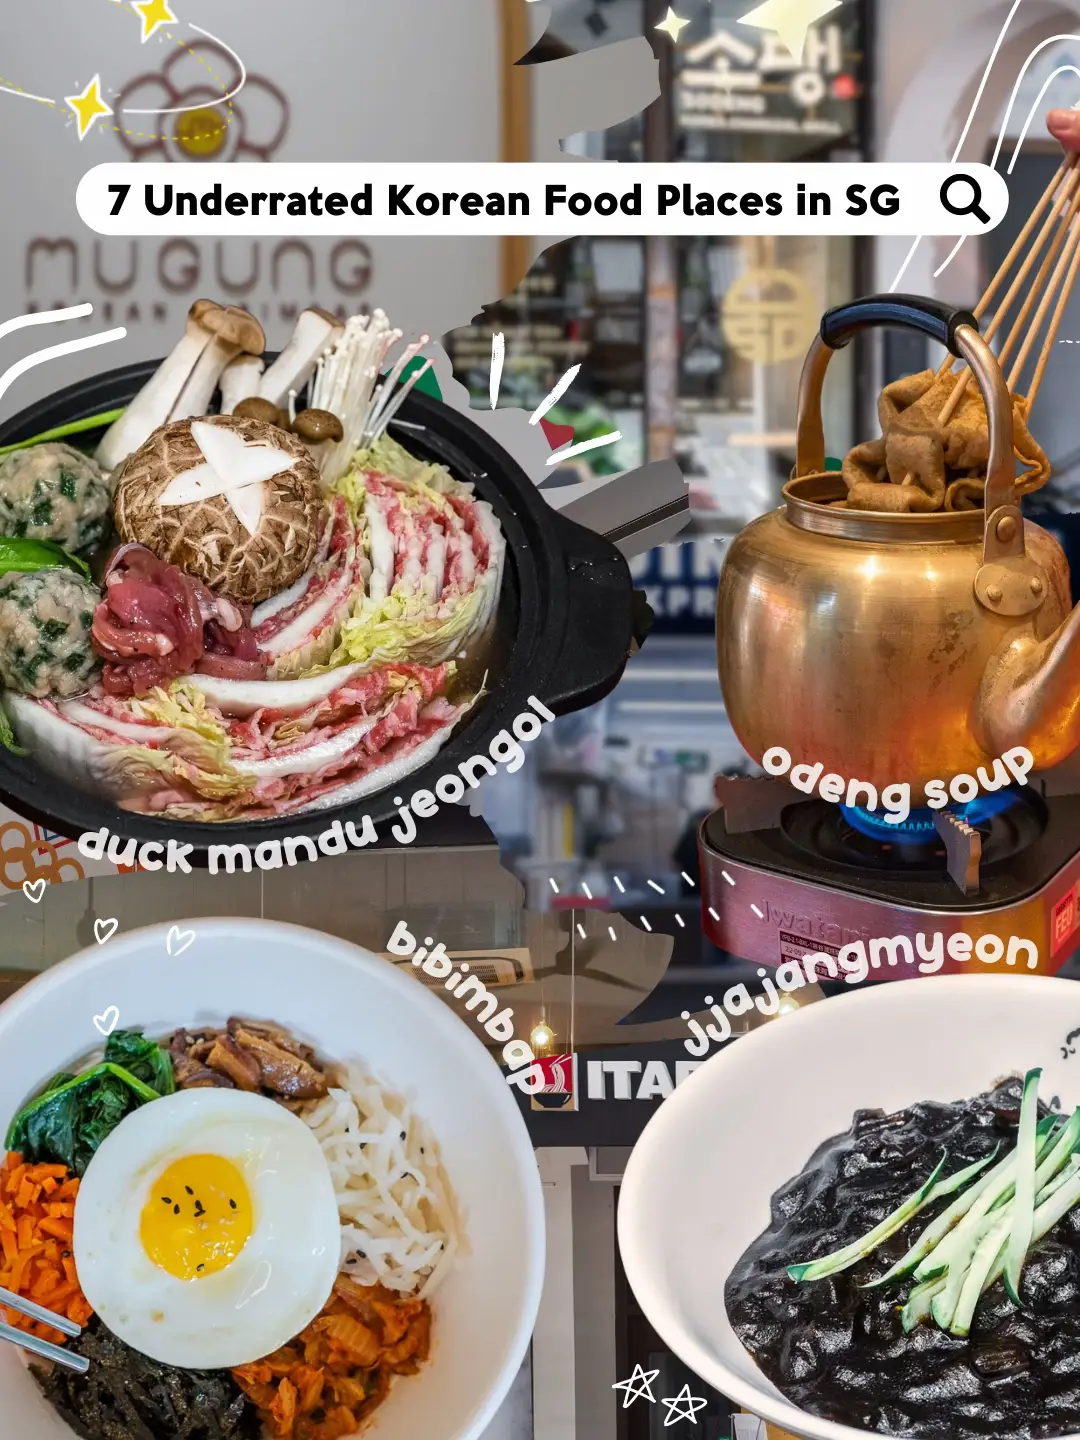 7 underrated Korean food places in SG 🇰🇷's images(0)